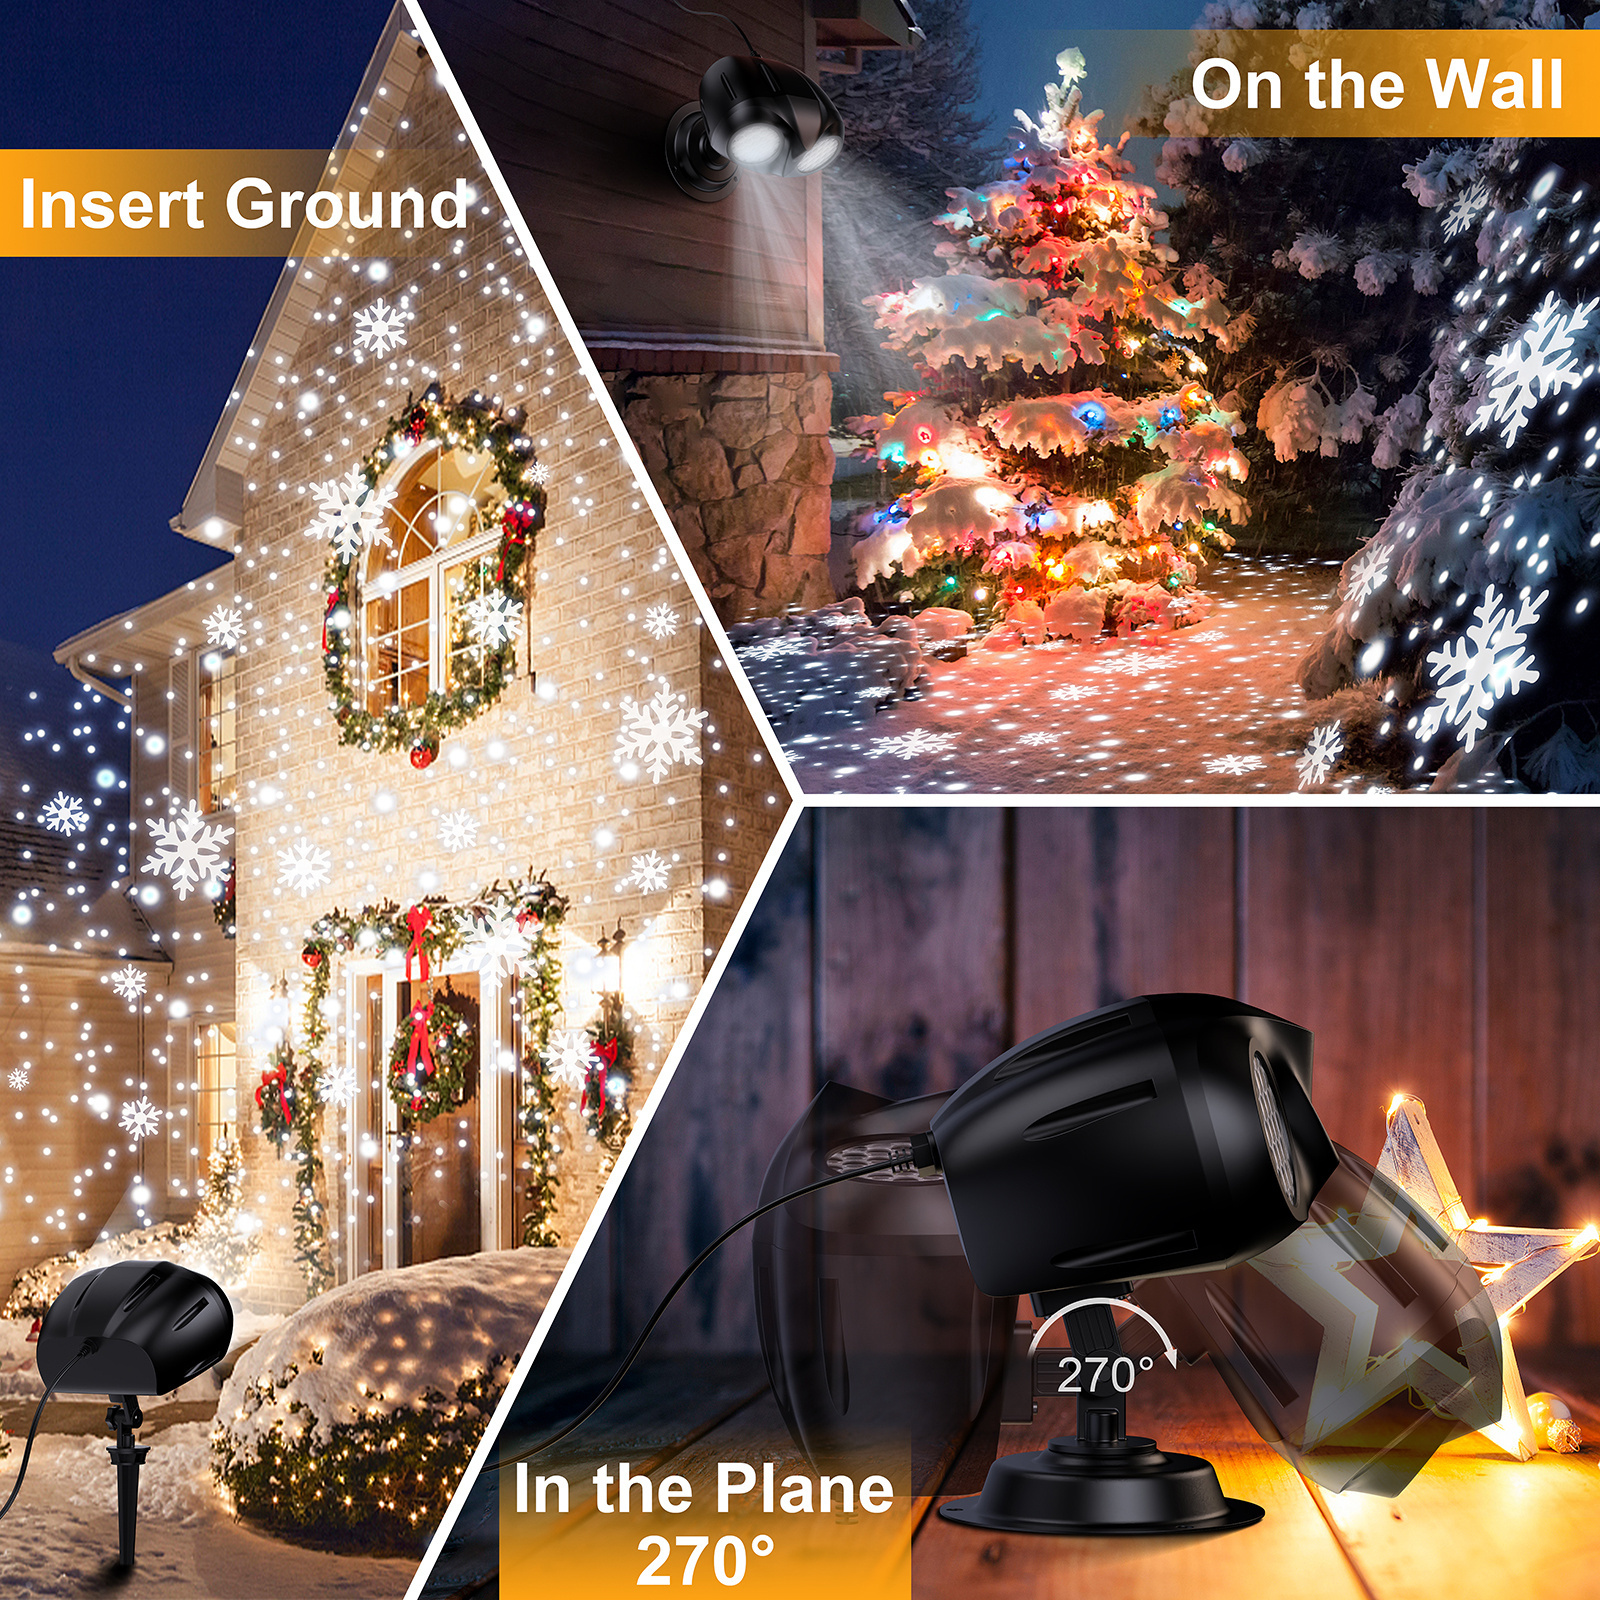 Christmas LED Projector Lights, Owl Shape Outdoor Snowflake Projector Lights with Remote RF, Quiet Projector Lights, IP65 Waterproof Snowfall Landscape Light for Xmas Halloween Holiday Party Decor